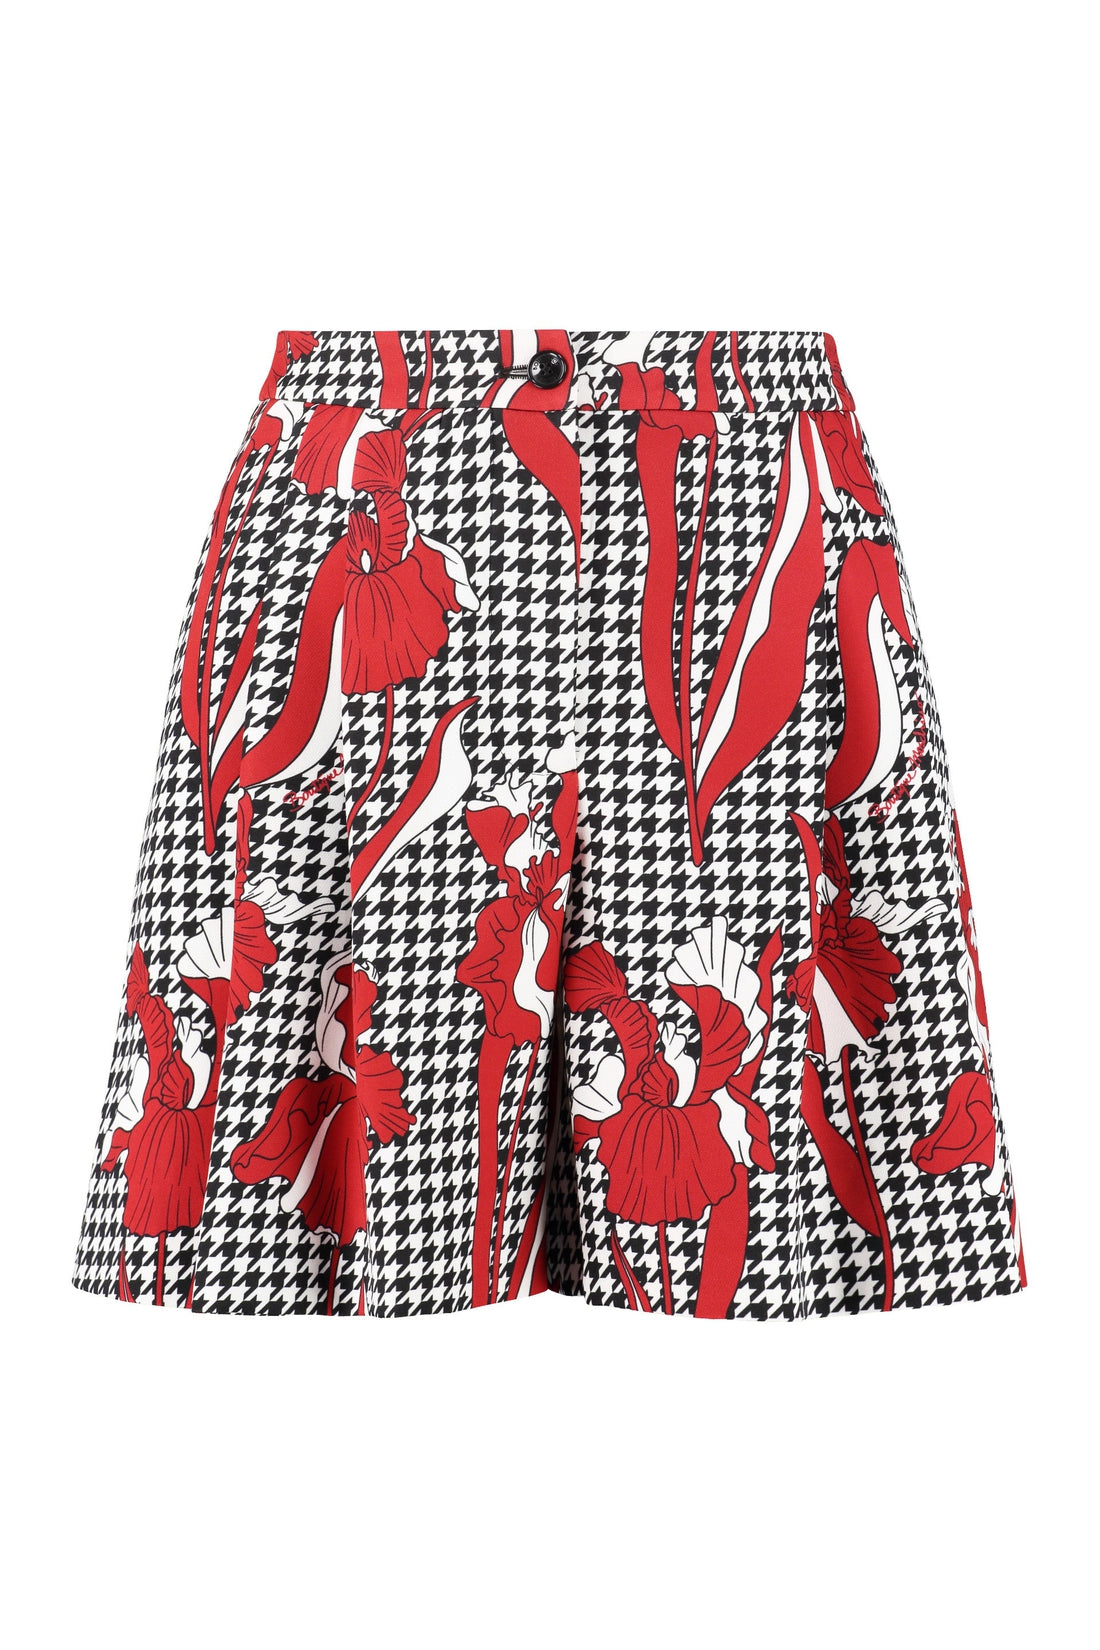 Boutique Moschino-OUTLET-SALE-Houndstooth shorts-ARCHIVIST